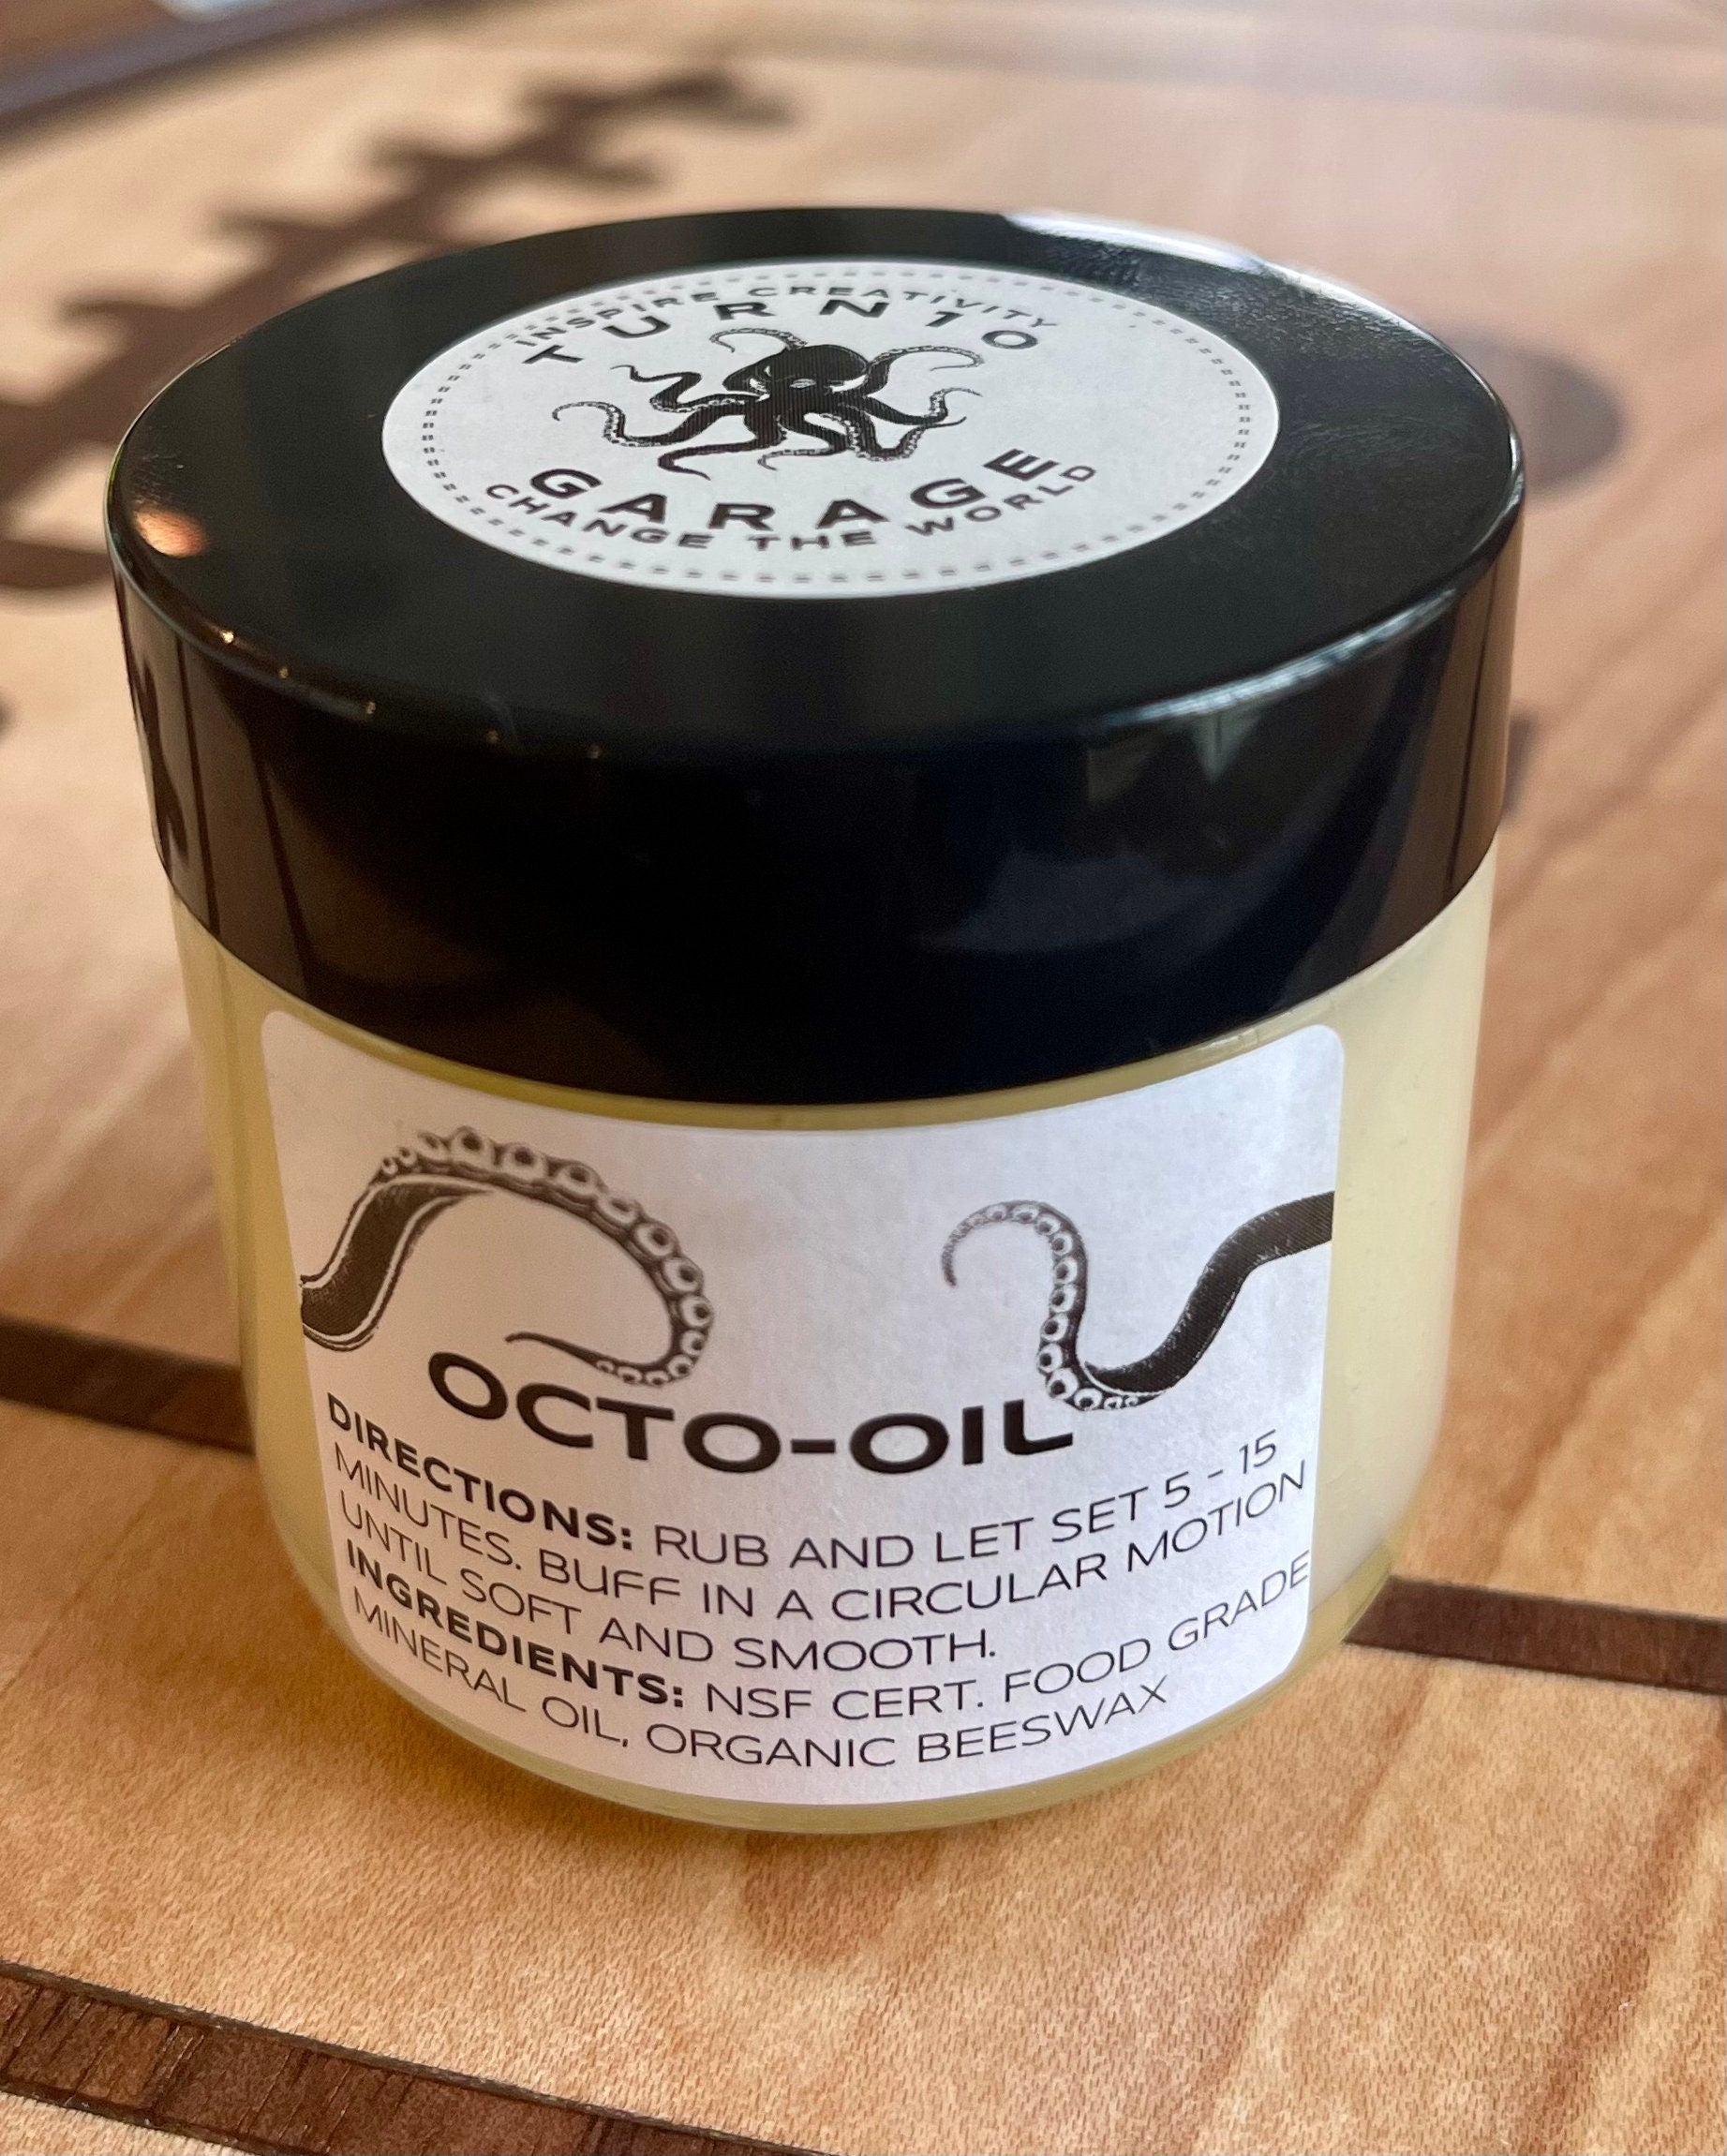 Octo-Oil all natural mineral oil with beeswax